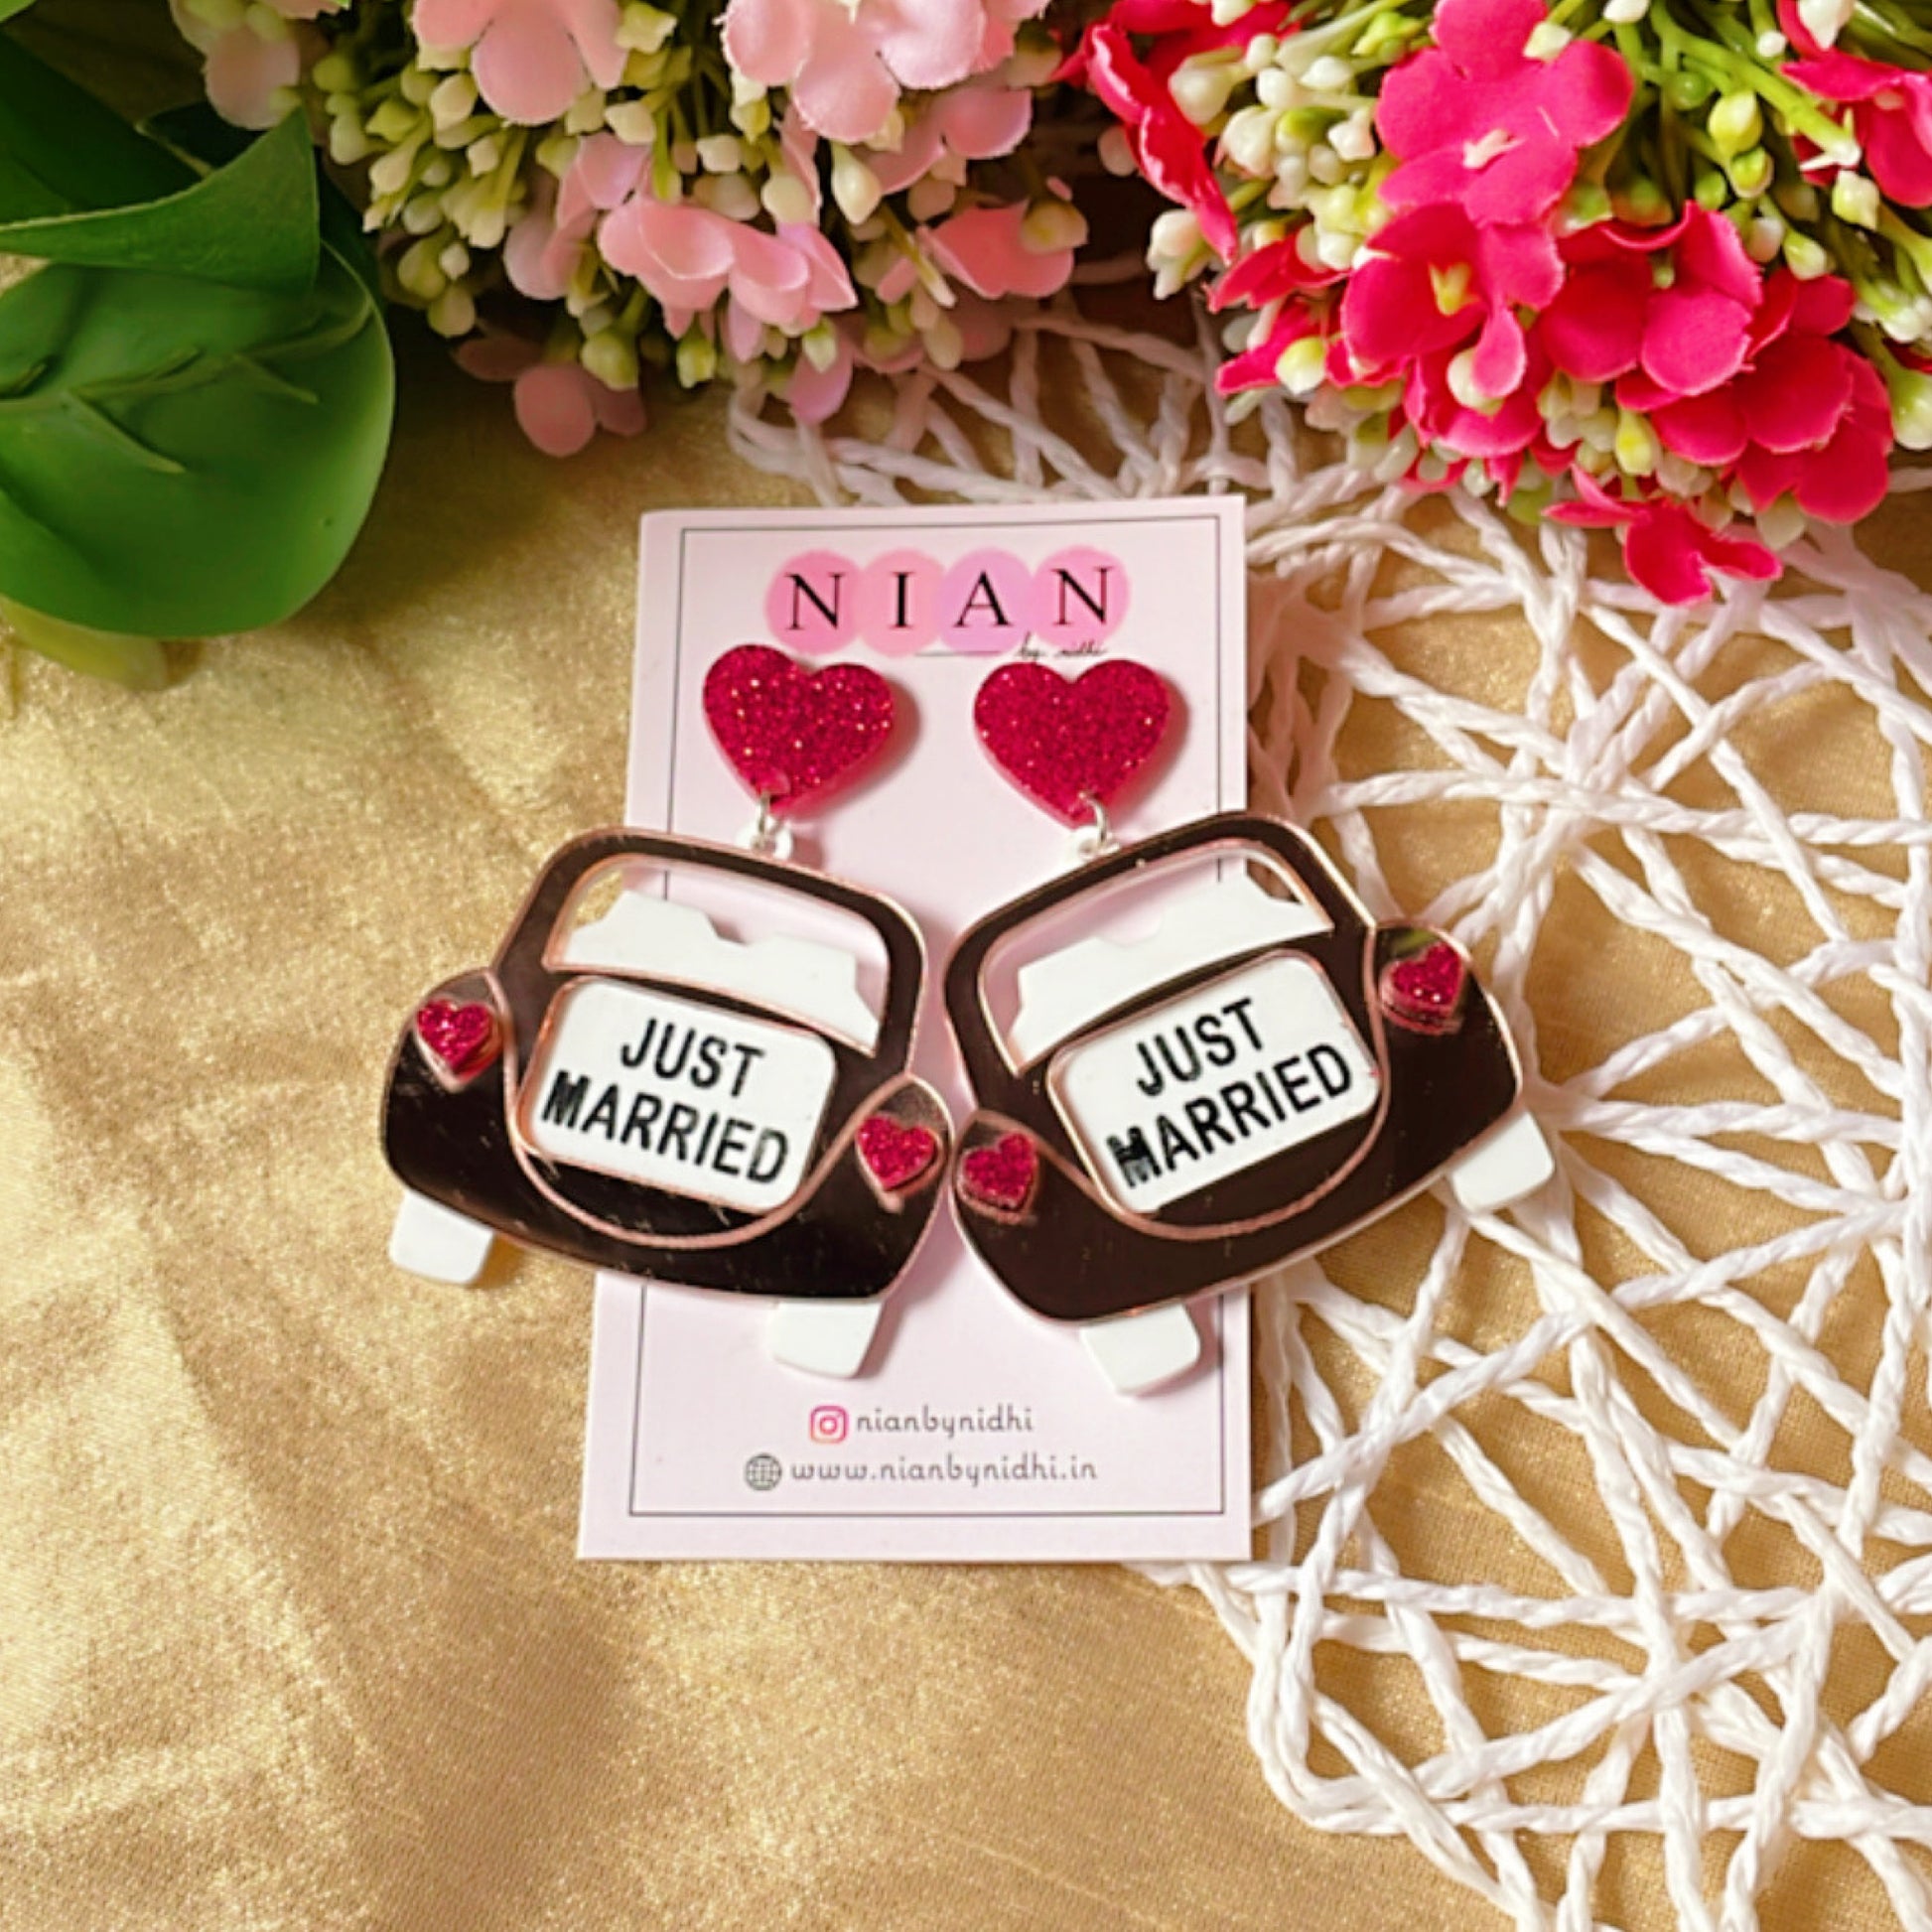 Just Married Earrings - Rosegold, White, and Shimmer Magenta - Nian by Nidhi - placed in a colorful background